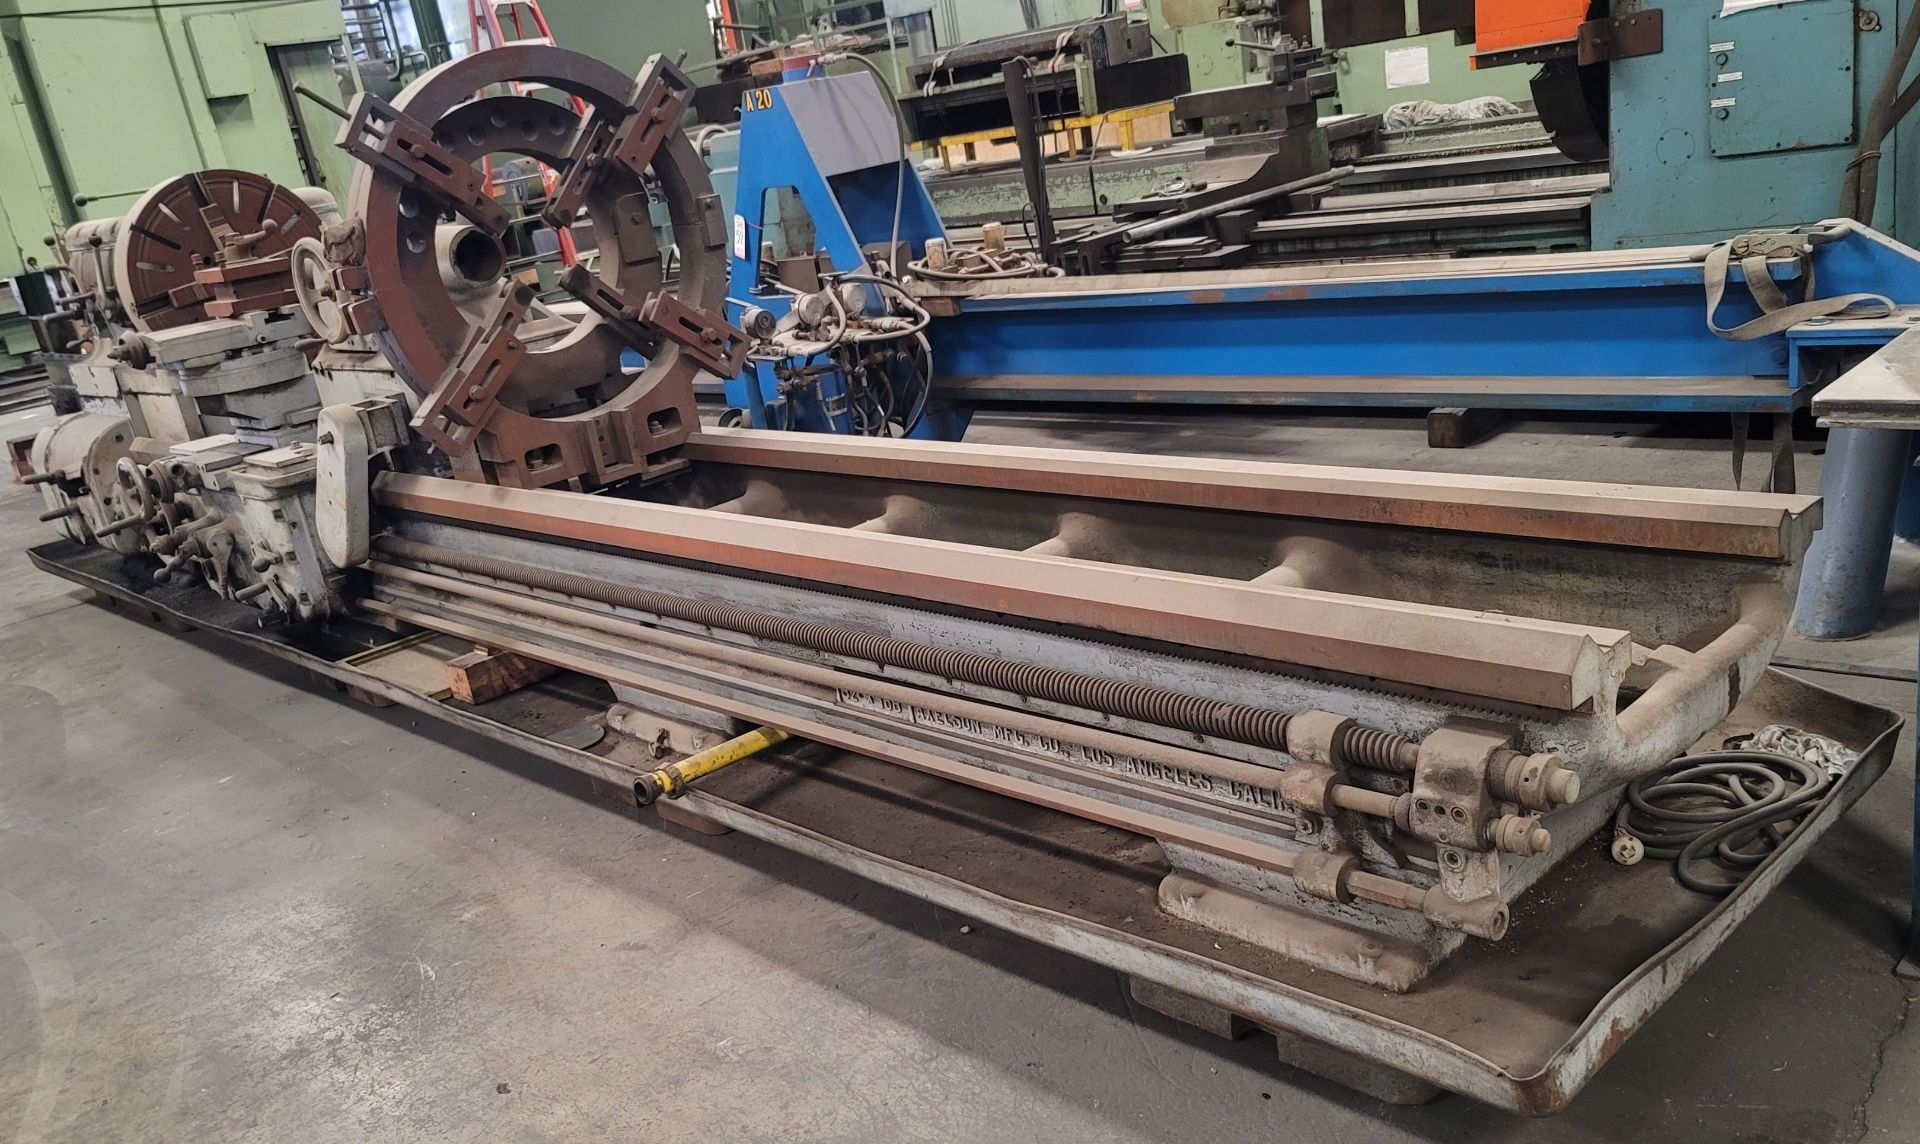 AXELSON A32 ENGINE LATHE, 32" X 168", 30" 4-JAW CHUCK, TAILSTOCK, (2) STEADY RESTS - Image 2 of 9